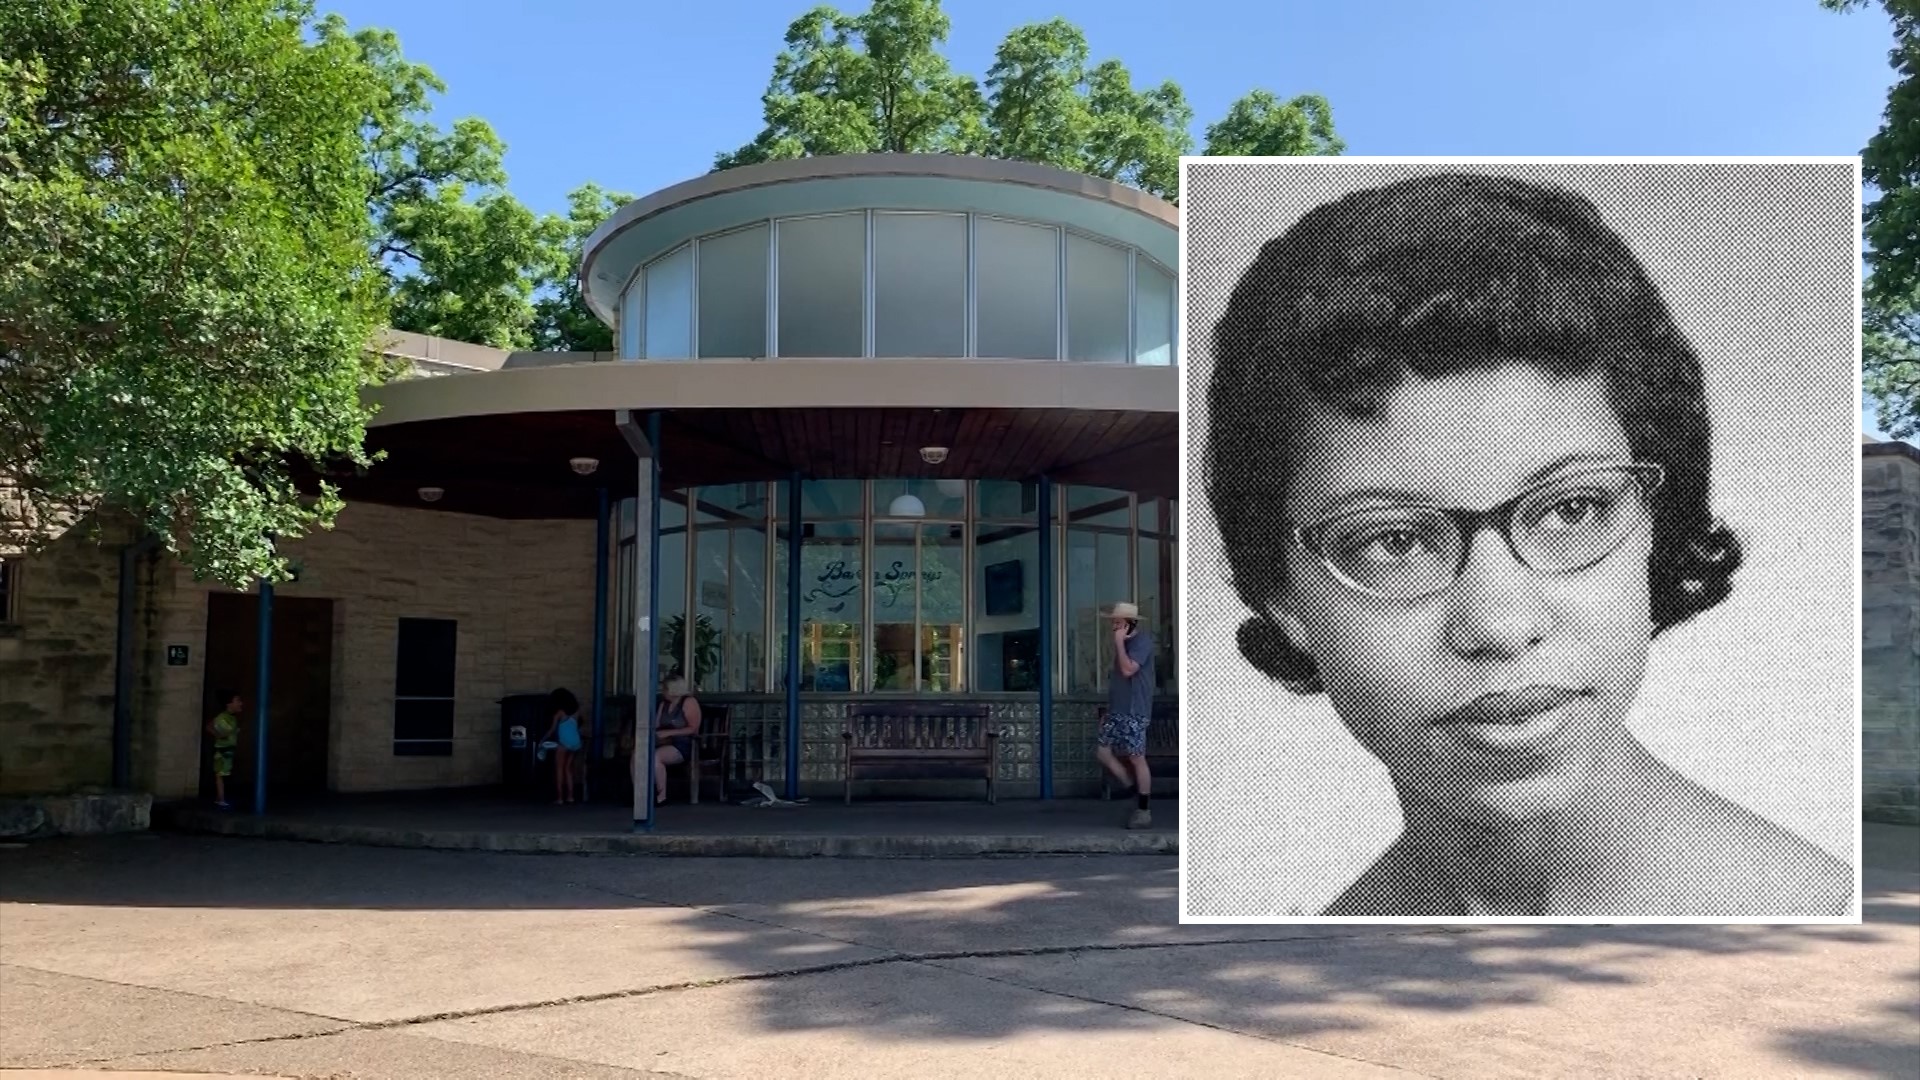 The Barton Springs Bathhouse will be named after a woman who made history at Barton Springs Pool.